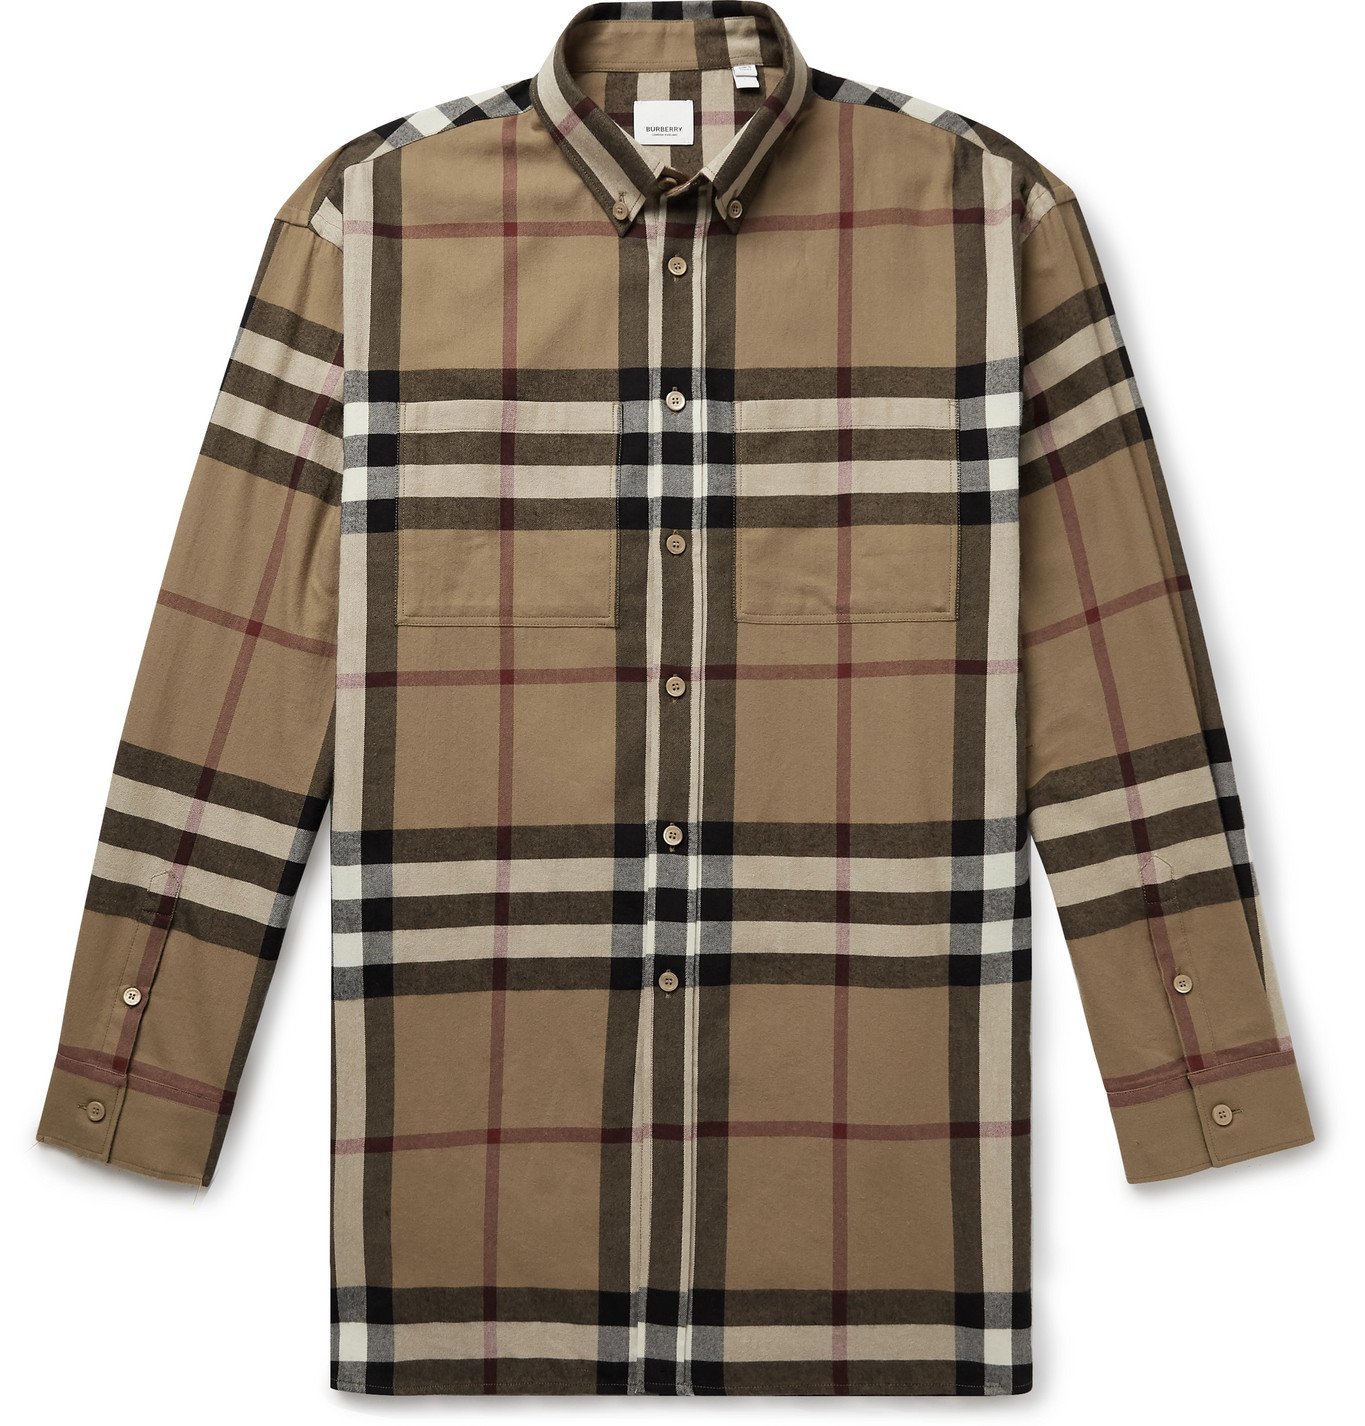 Burberry - Button-Down Collar Checked Cotton-Flannel Shirt - Brown Burberry